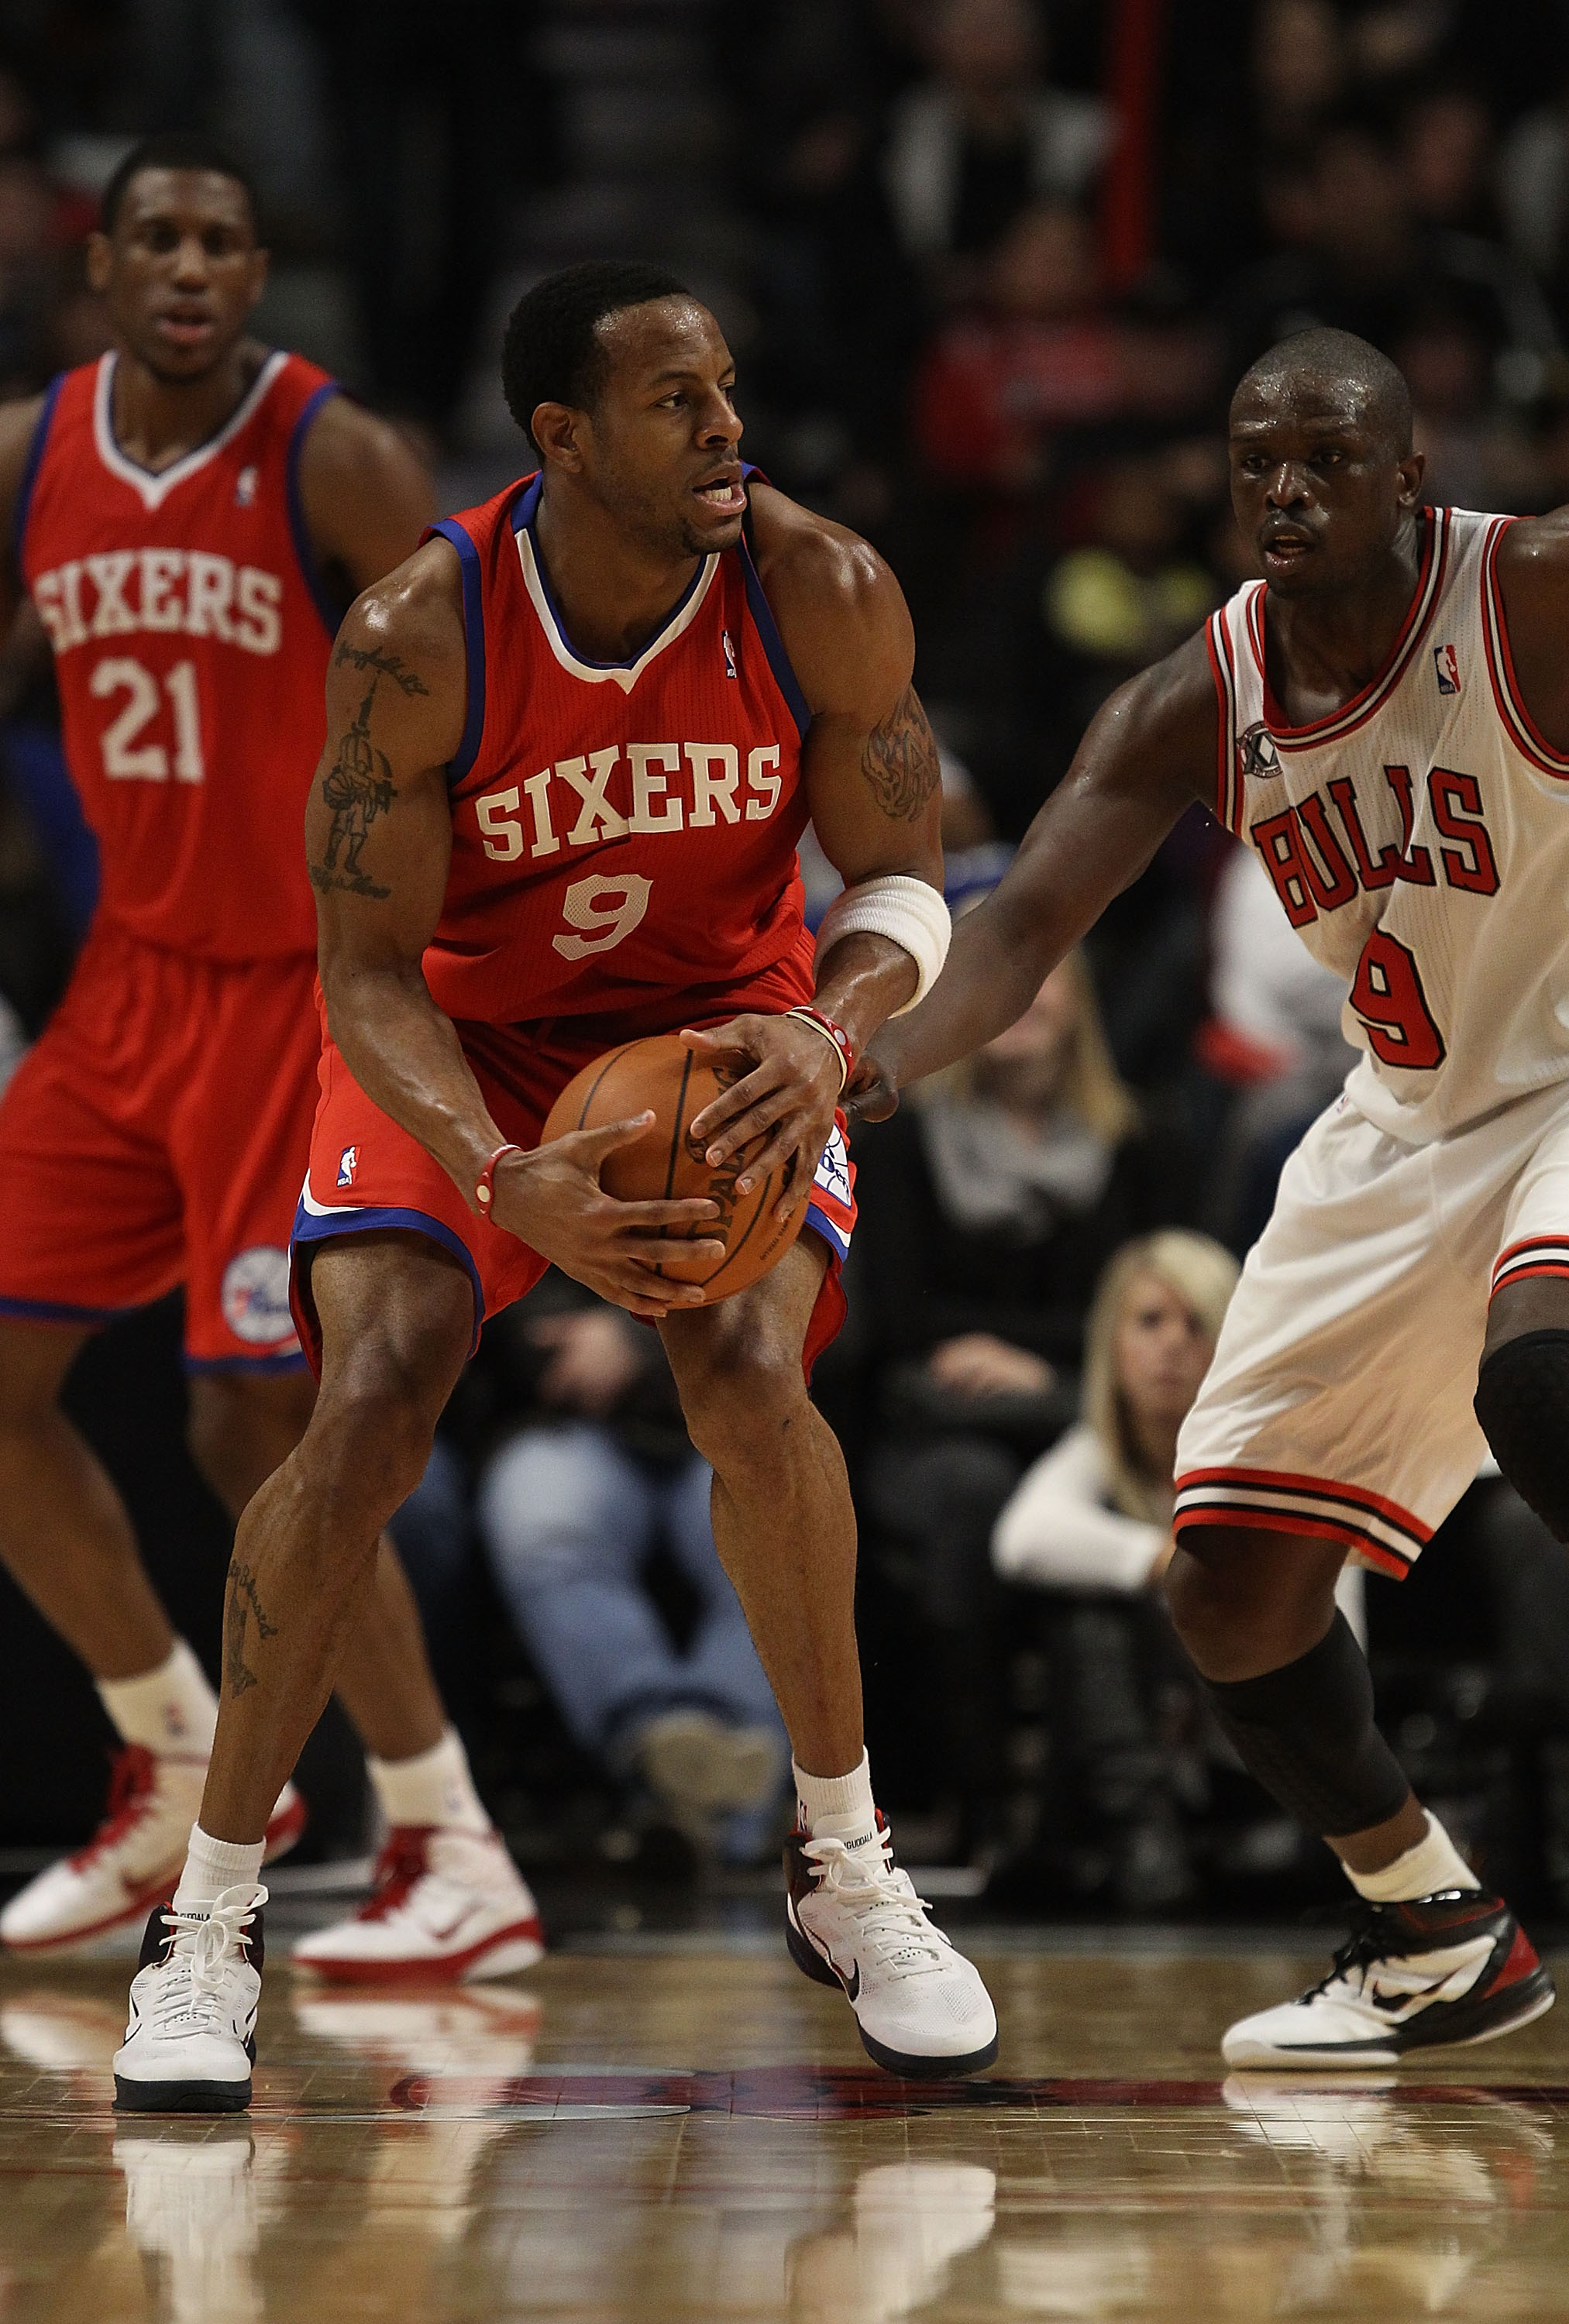 CHICAGO, IL - DECEMBER 21: Andre Iguodala #9 of the Philadelphia 76ers tries to move against Loul Deng #9 of the Chicago Bulls at the United Center on December 21, 2010 in Chicago, Illinois. The Bulls defeated the 76ers 121-76. NOTE TO USER: User expressl